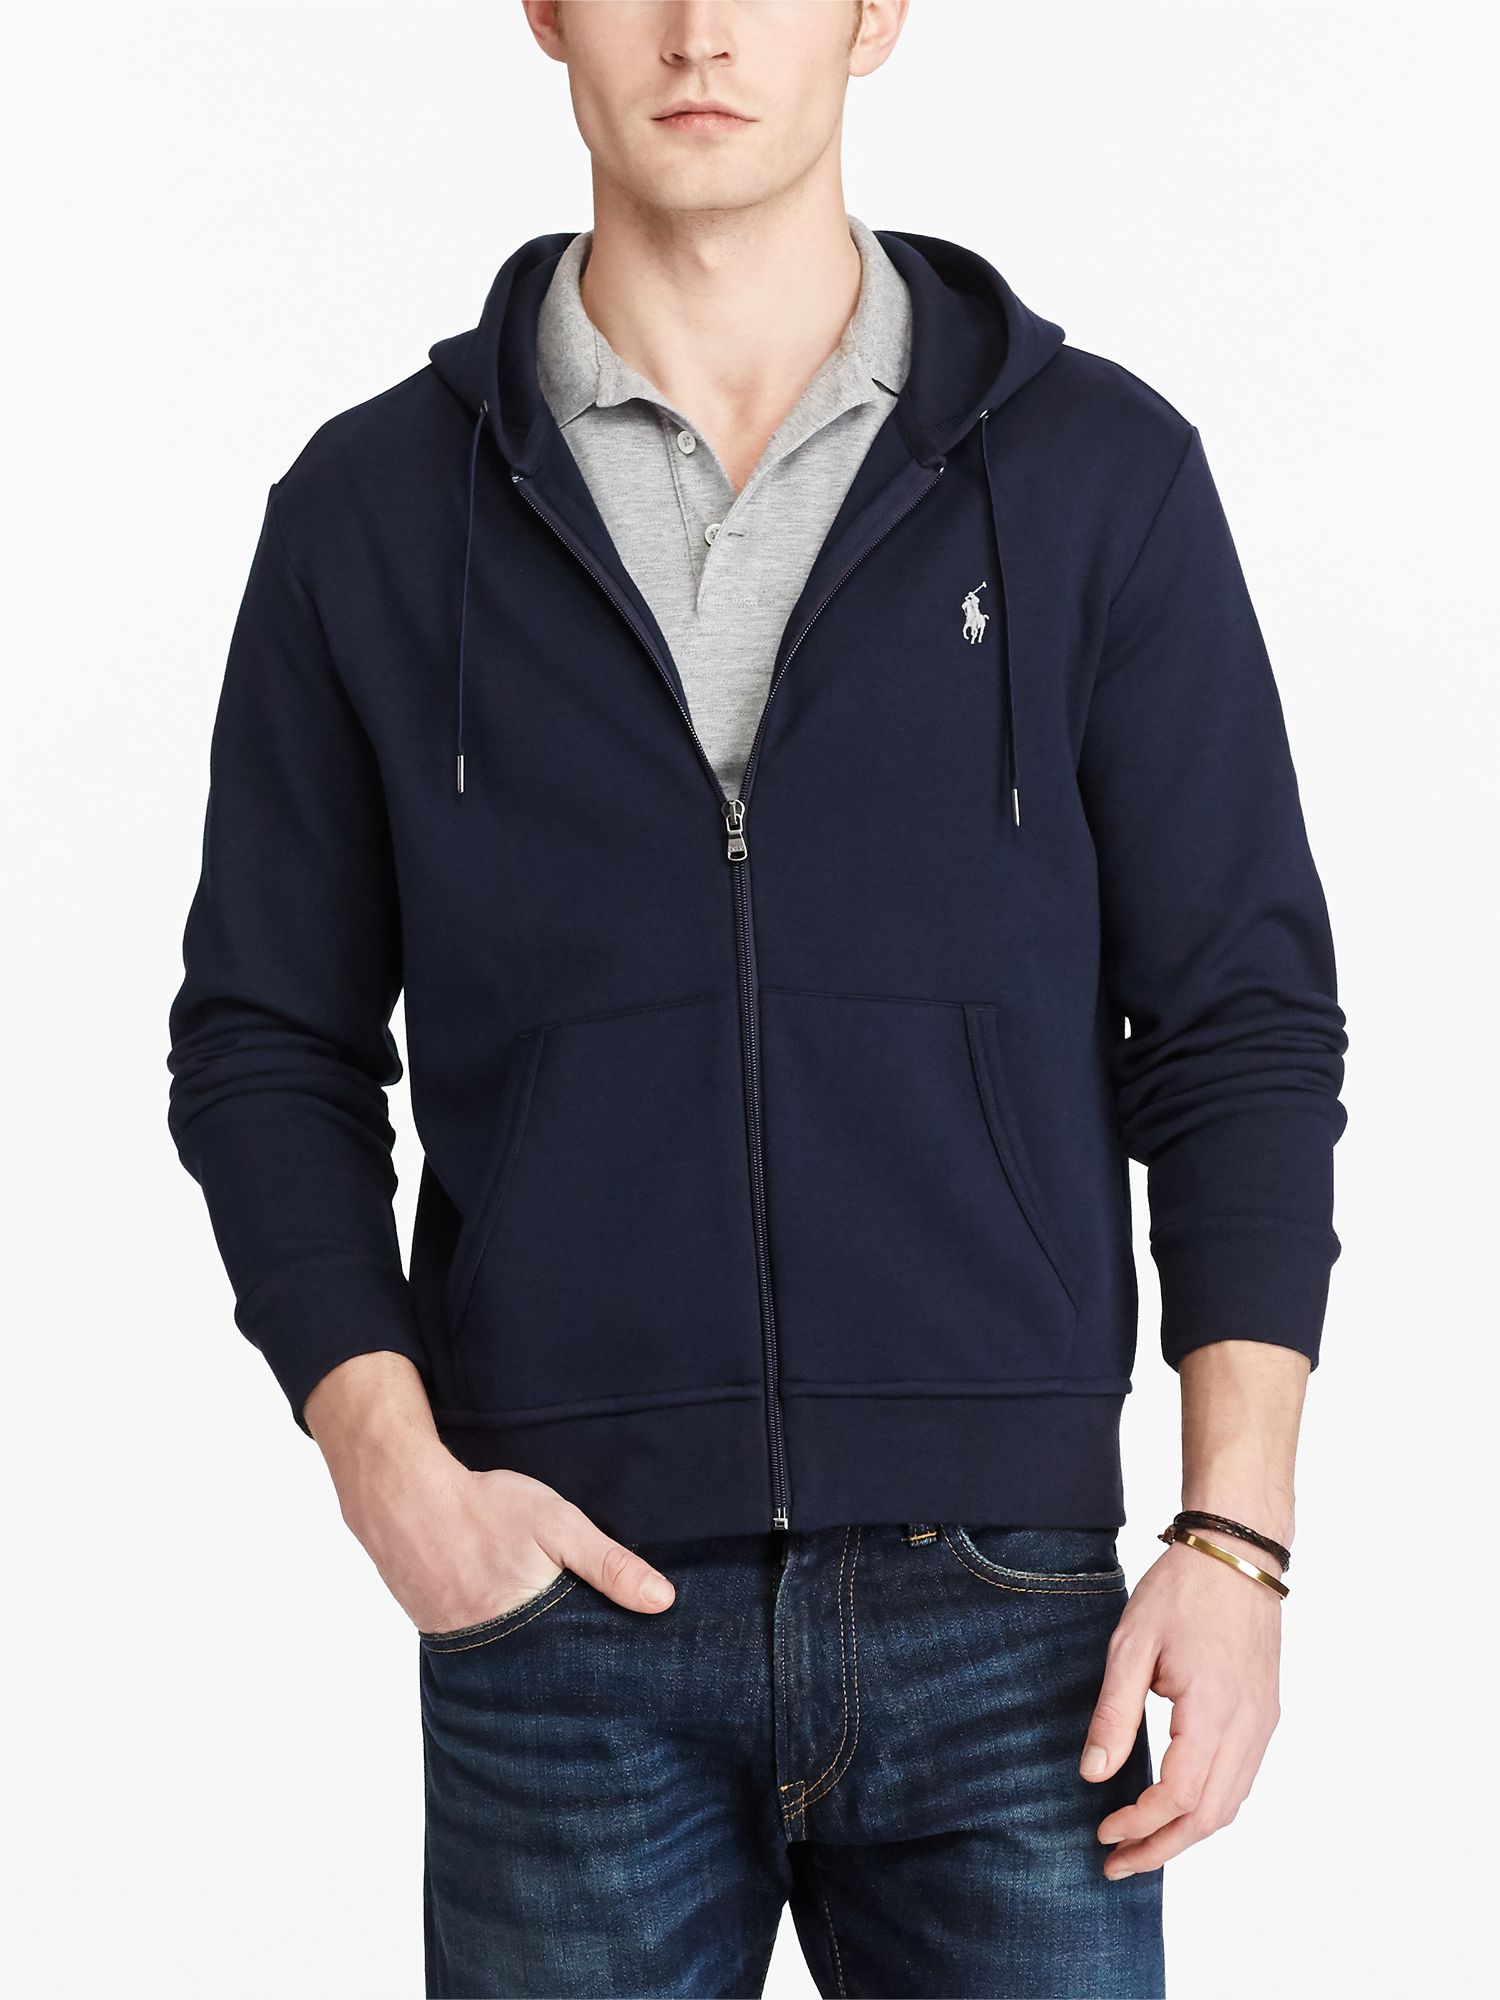 polo ralph lauren full zip borg lined hoodie with player logo in navy